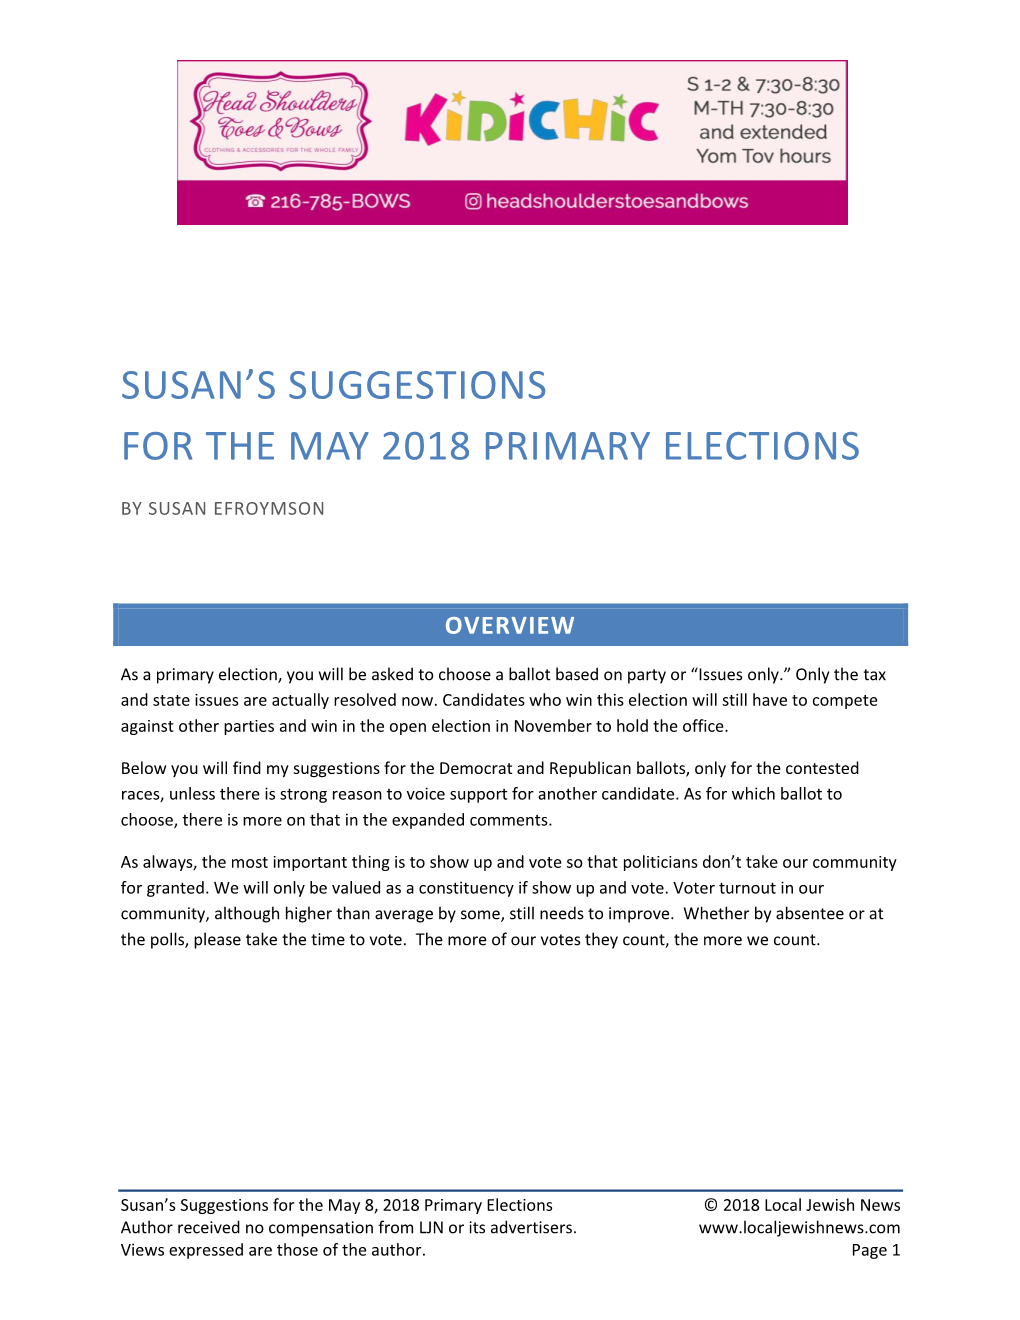 Susan's Suggestions for the May 2018 Primary Elections